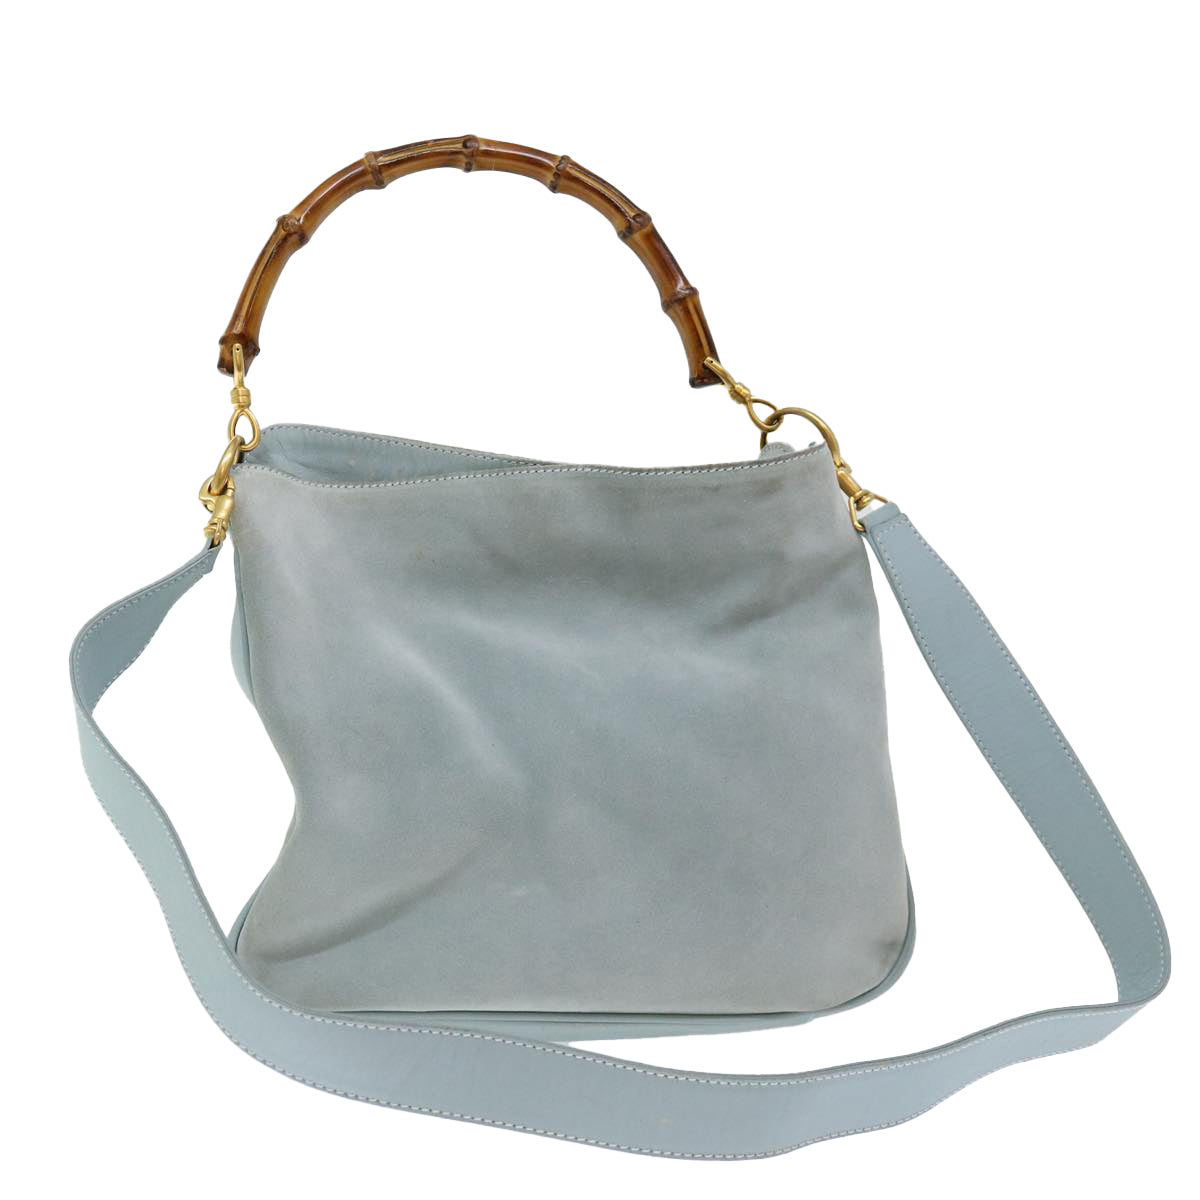 GUCCI Bamboo Shoulder Bag Suede 2way Light Blue Auth 70205